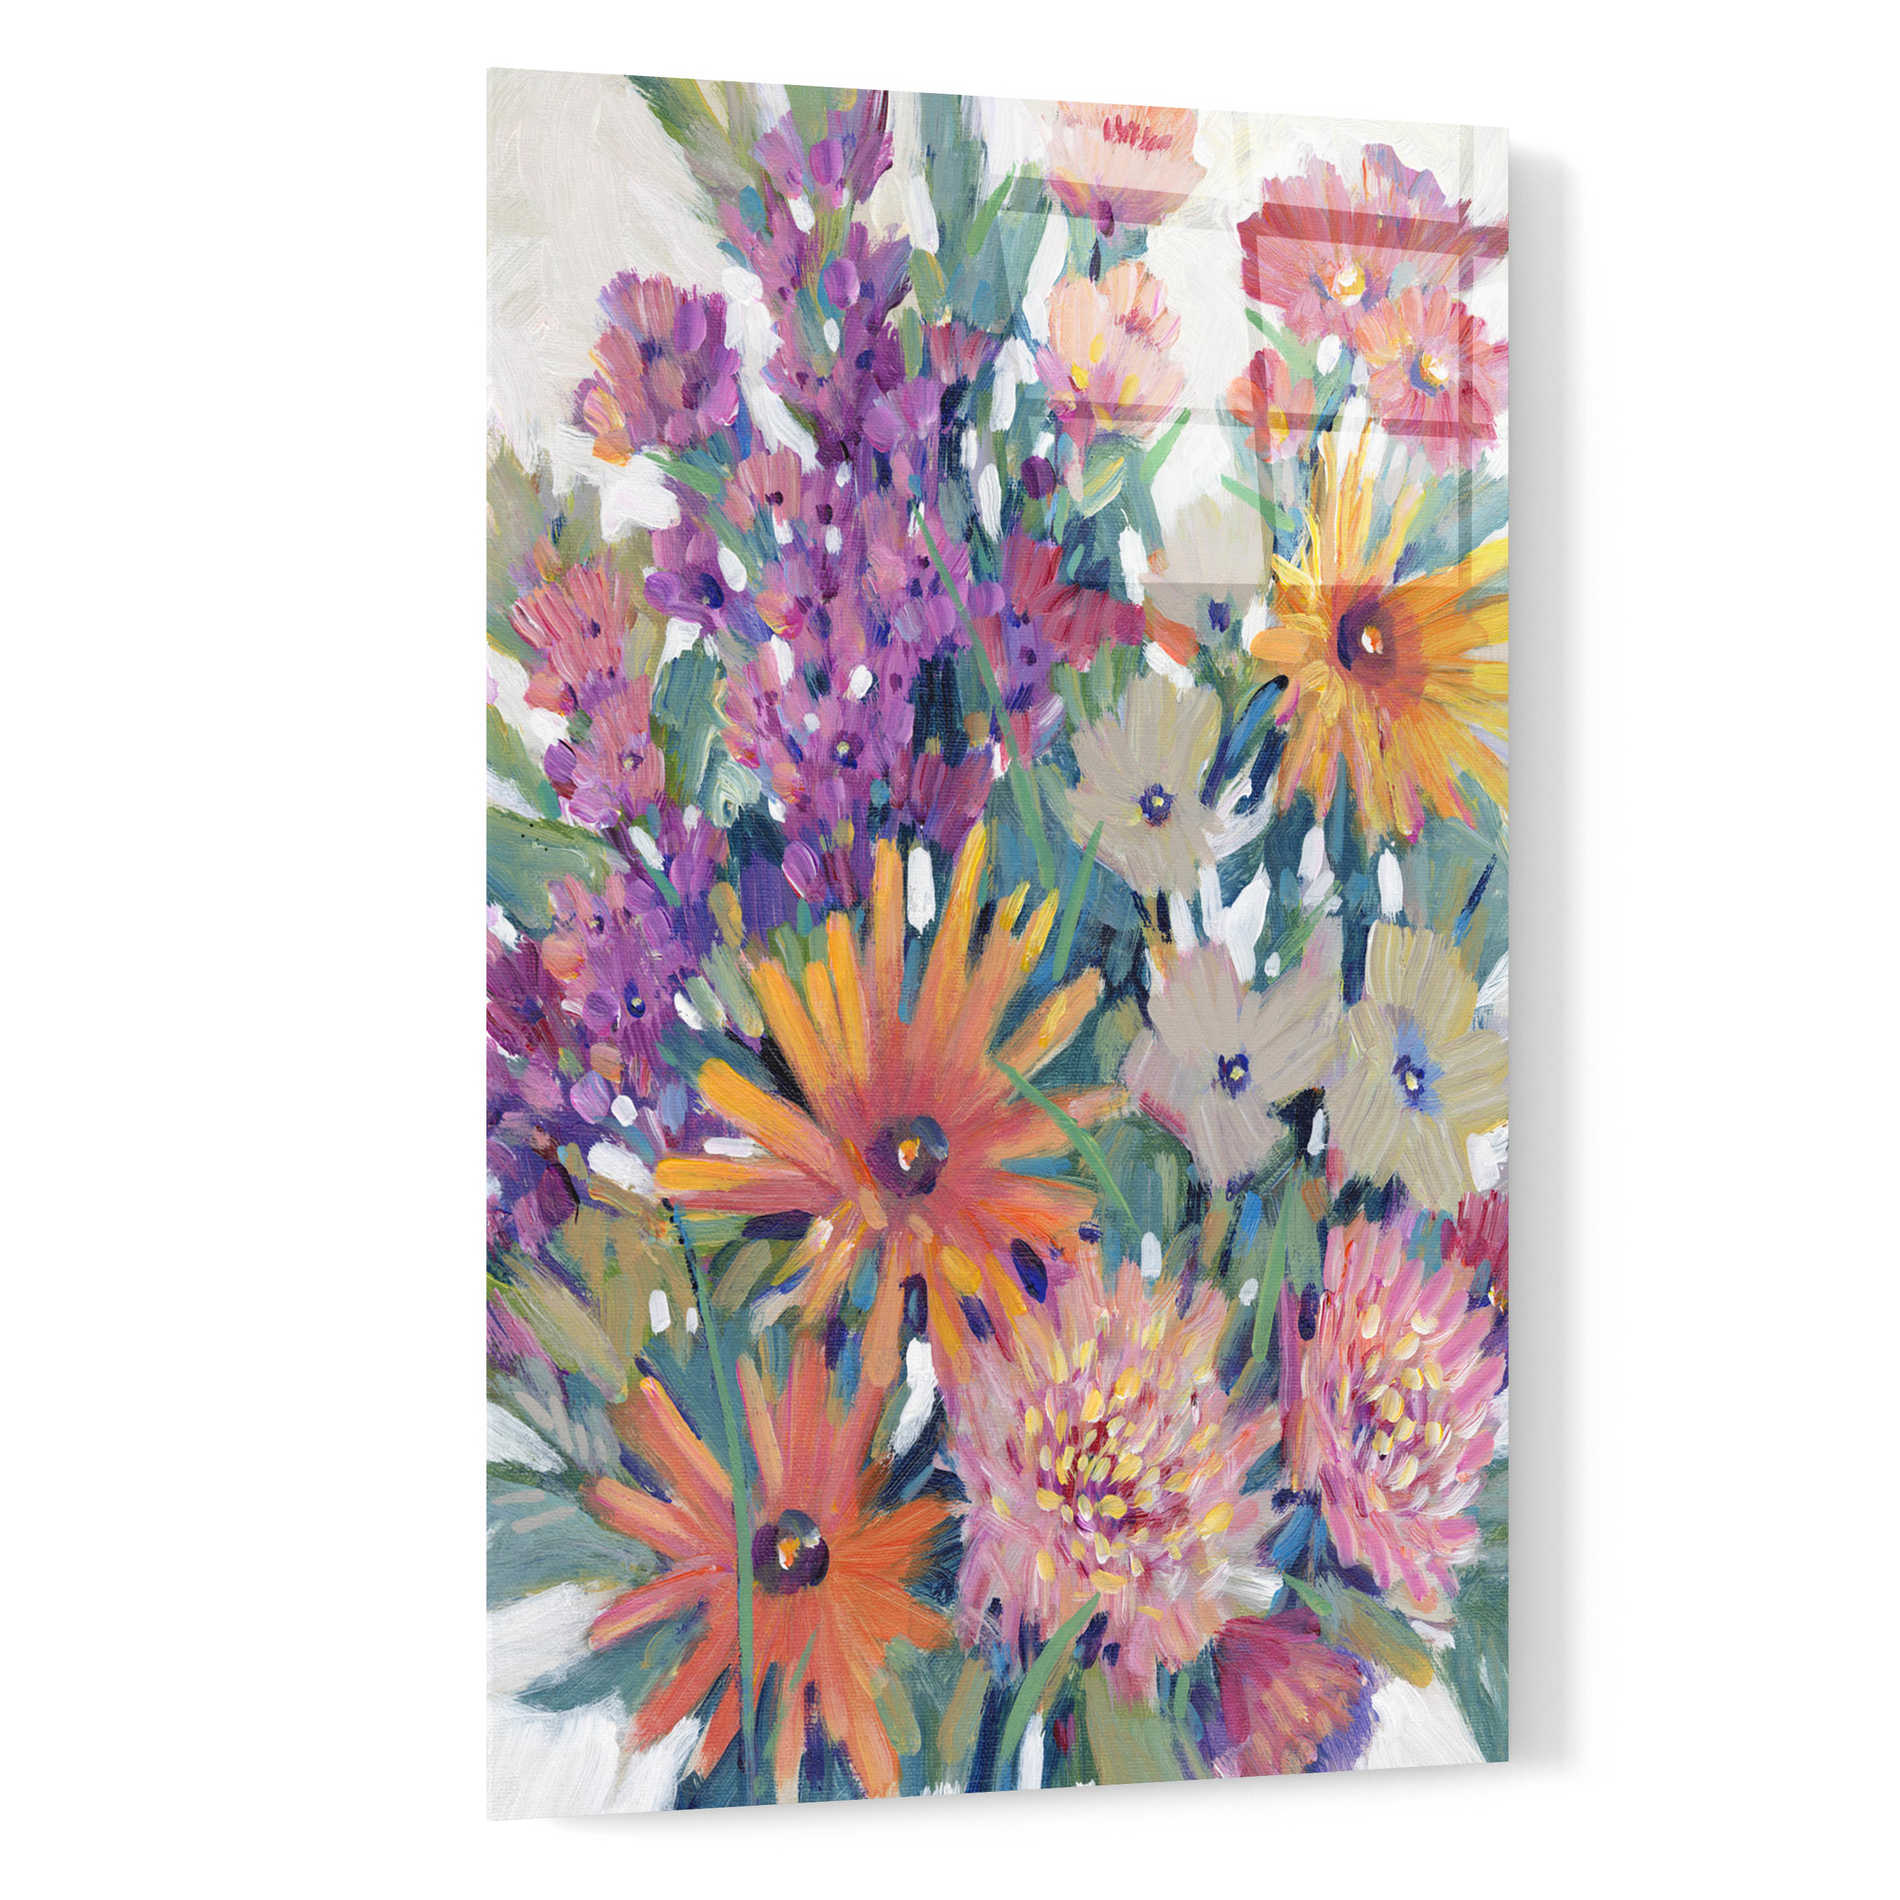 Epic Art 'Spring in Bloom II' by Tim O'Toole, Acrylic Glass Wall Art,16x24